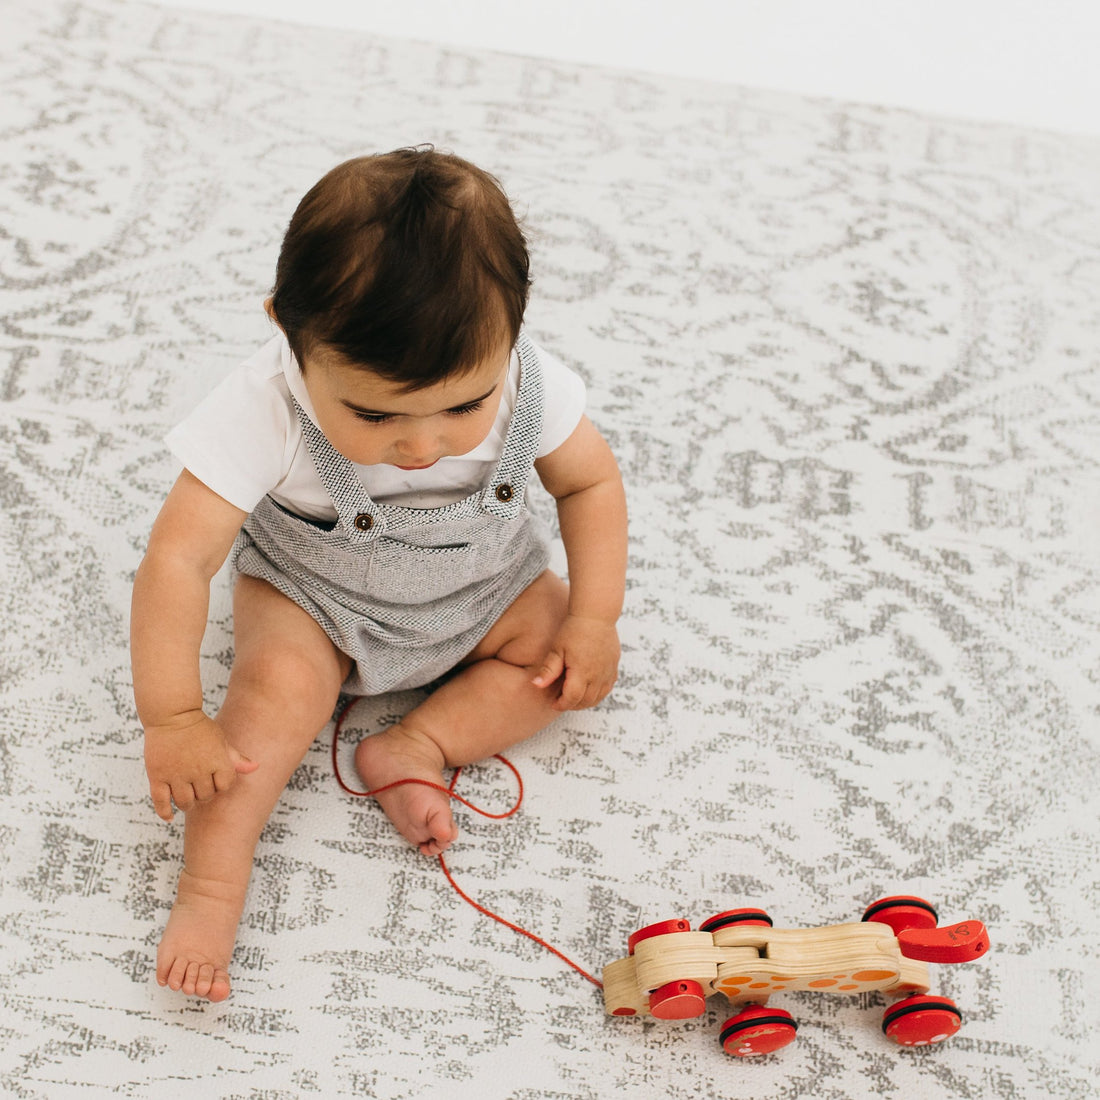 The Romy Rug by Ruggish • Two-Sided, Memory Foam Play Mat with Modern, Oriental Designer Rug Pattern